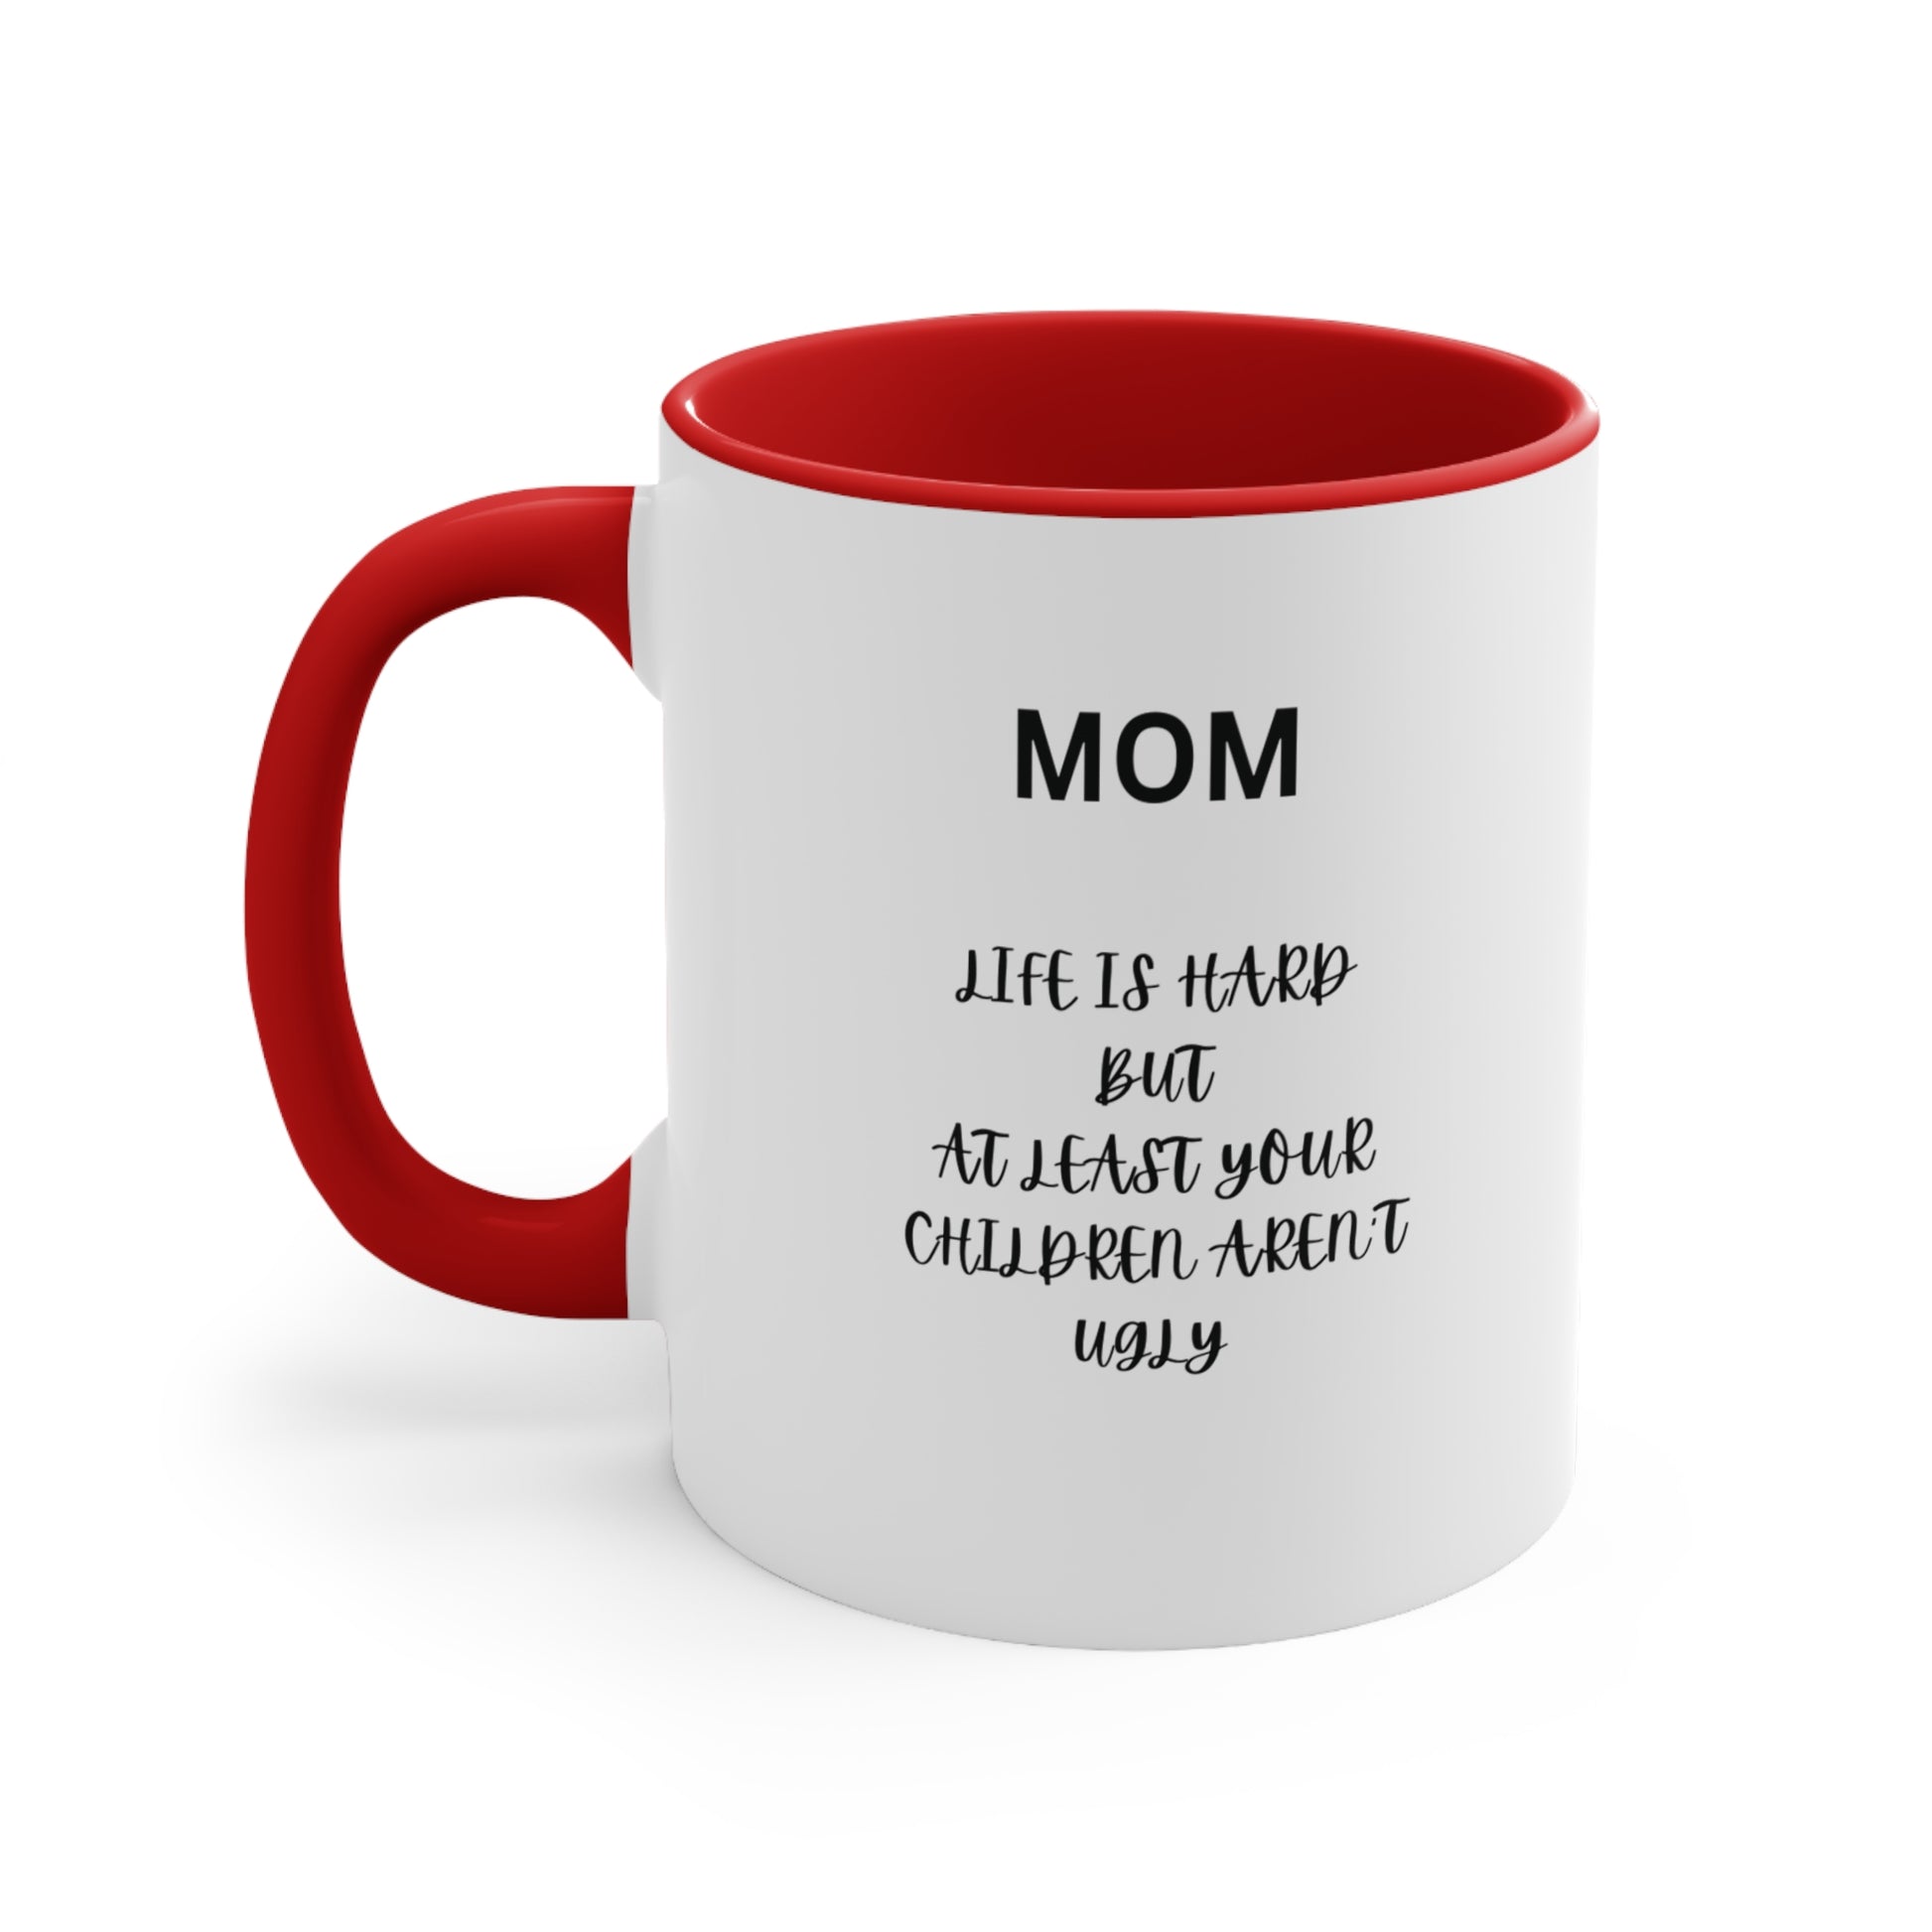 Chic 11oz MOM UGLY Accent Coffee Mug - Perfect Mother's Day Gift2